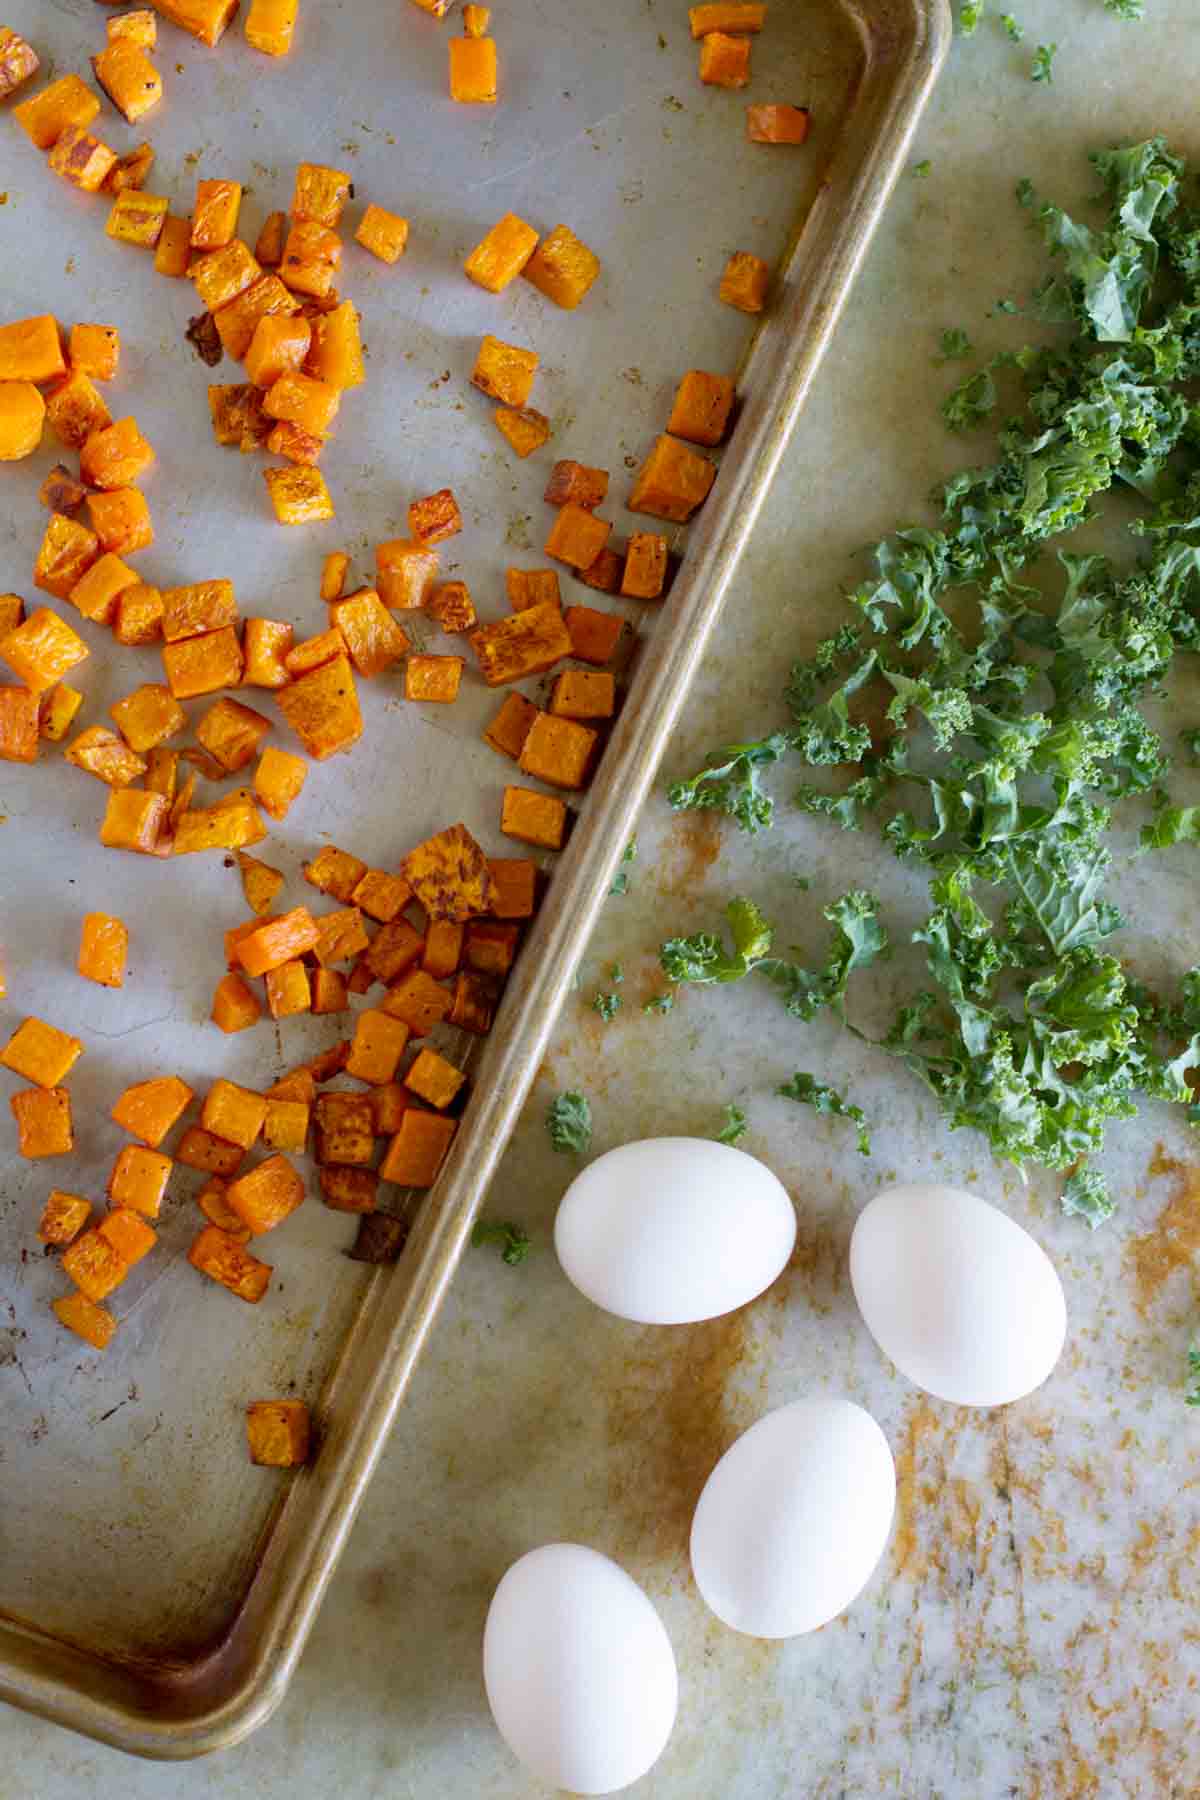 Ingredients for Butternut Squash Quiche with Kale